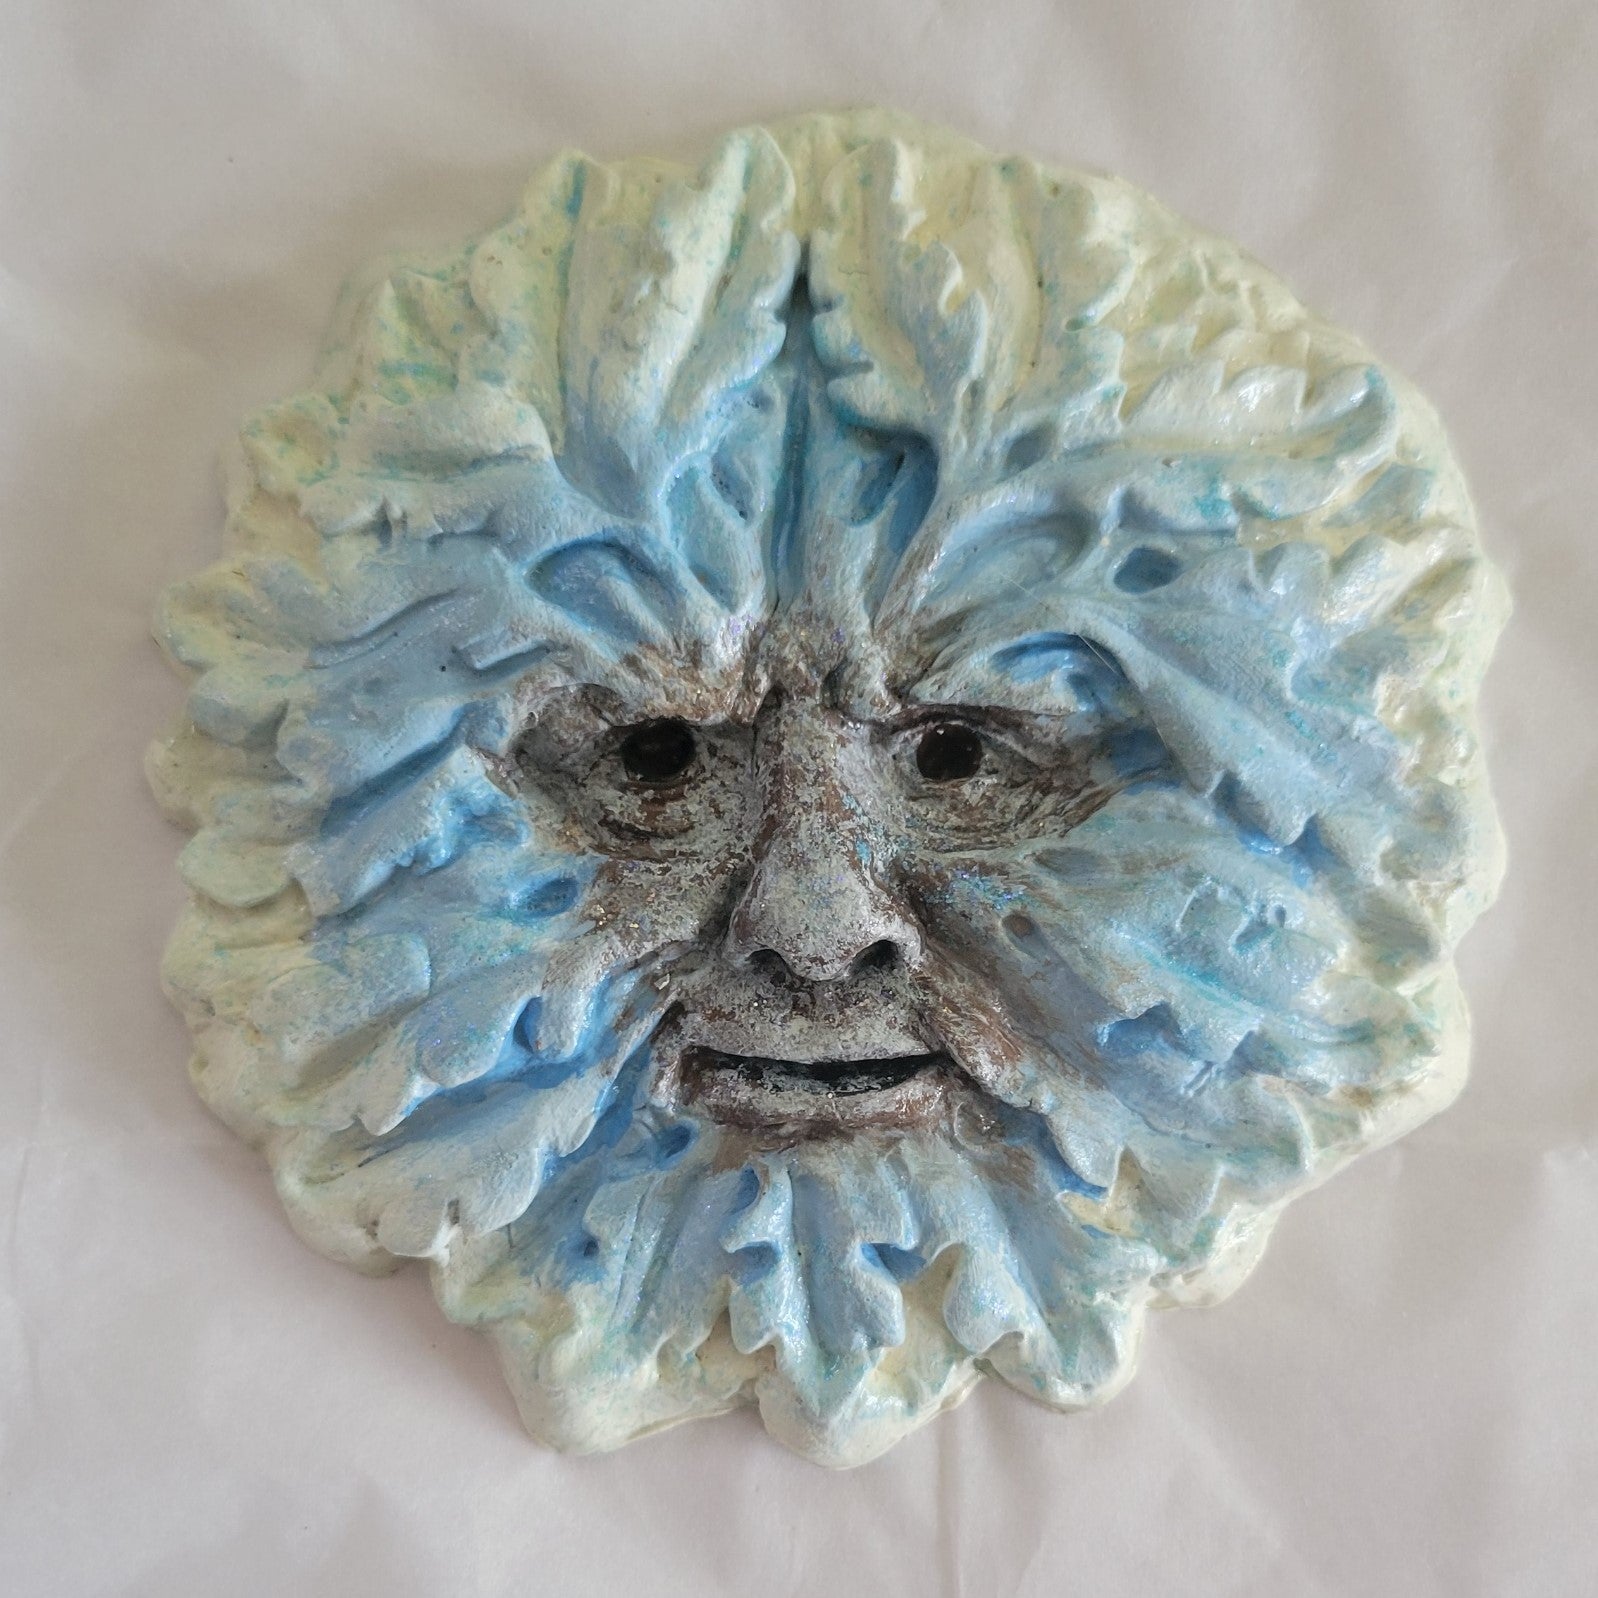 Greenman decoration, Medieval architecture, gifts for history lovers, handmade. Winter colors